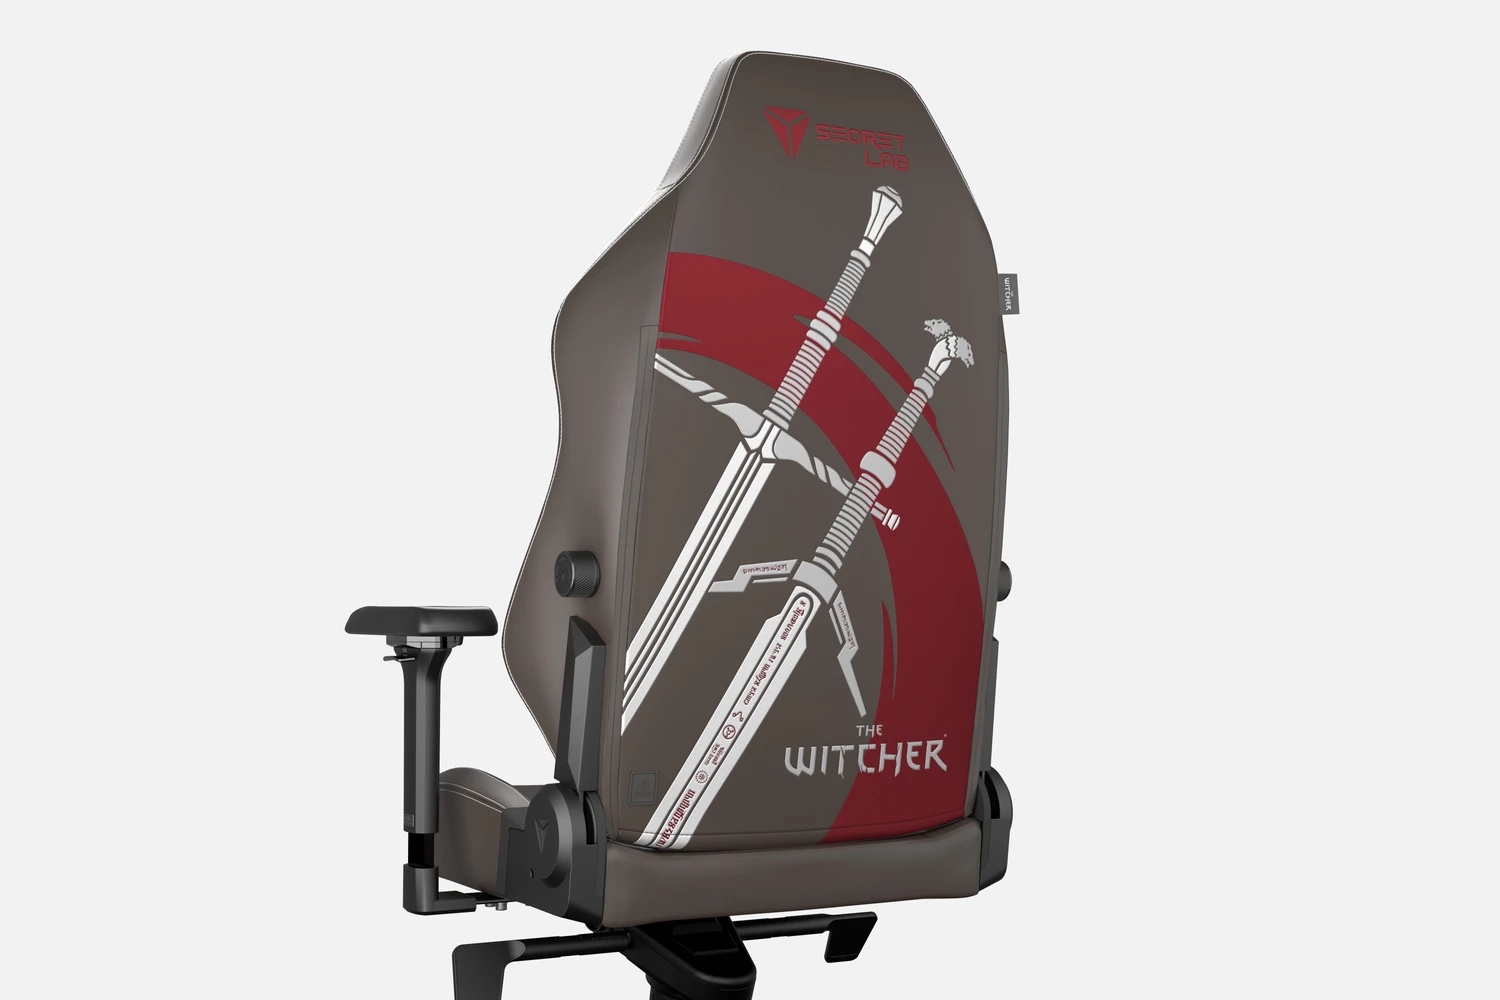 dos-epee-the-witcher-chaise